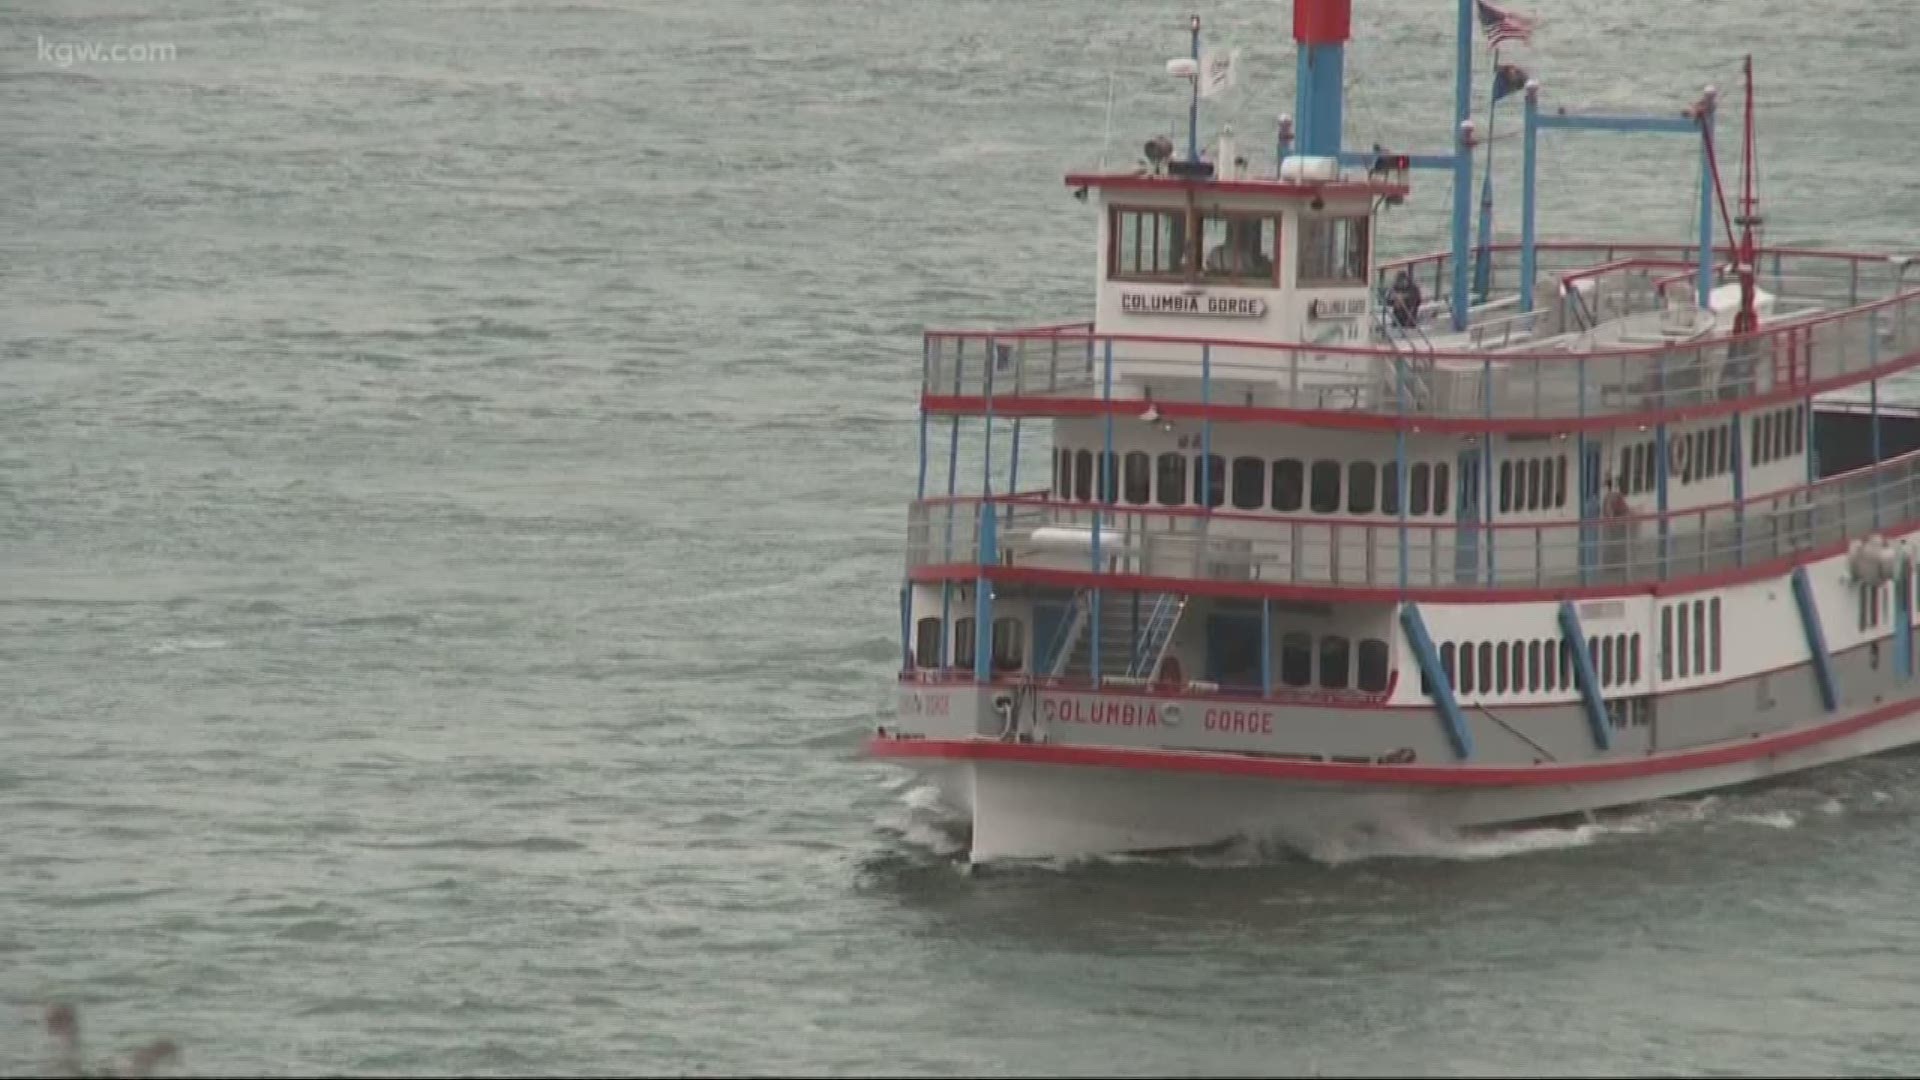 Grant McOmie takes us for a ride on the Sternwheeler Columbia Gorge